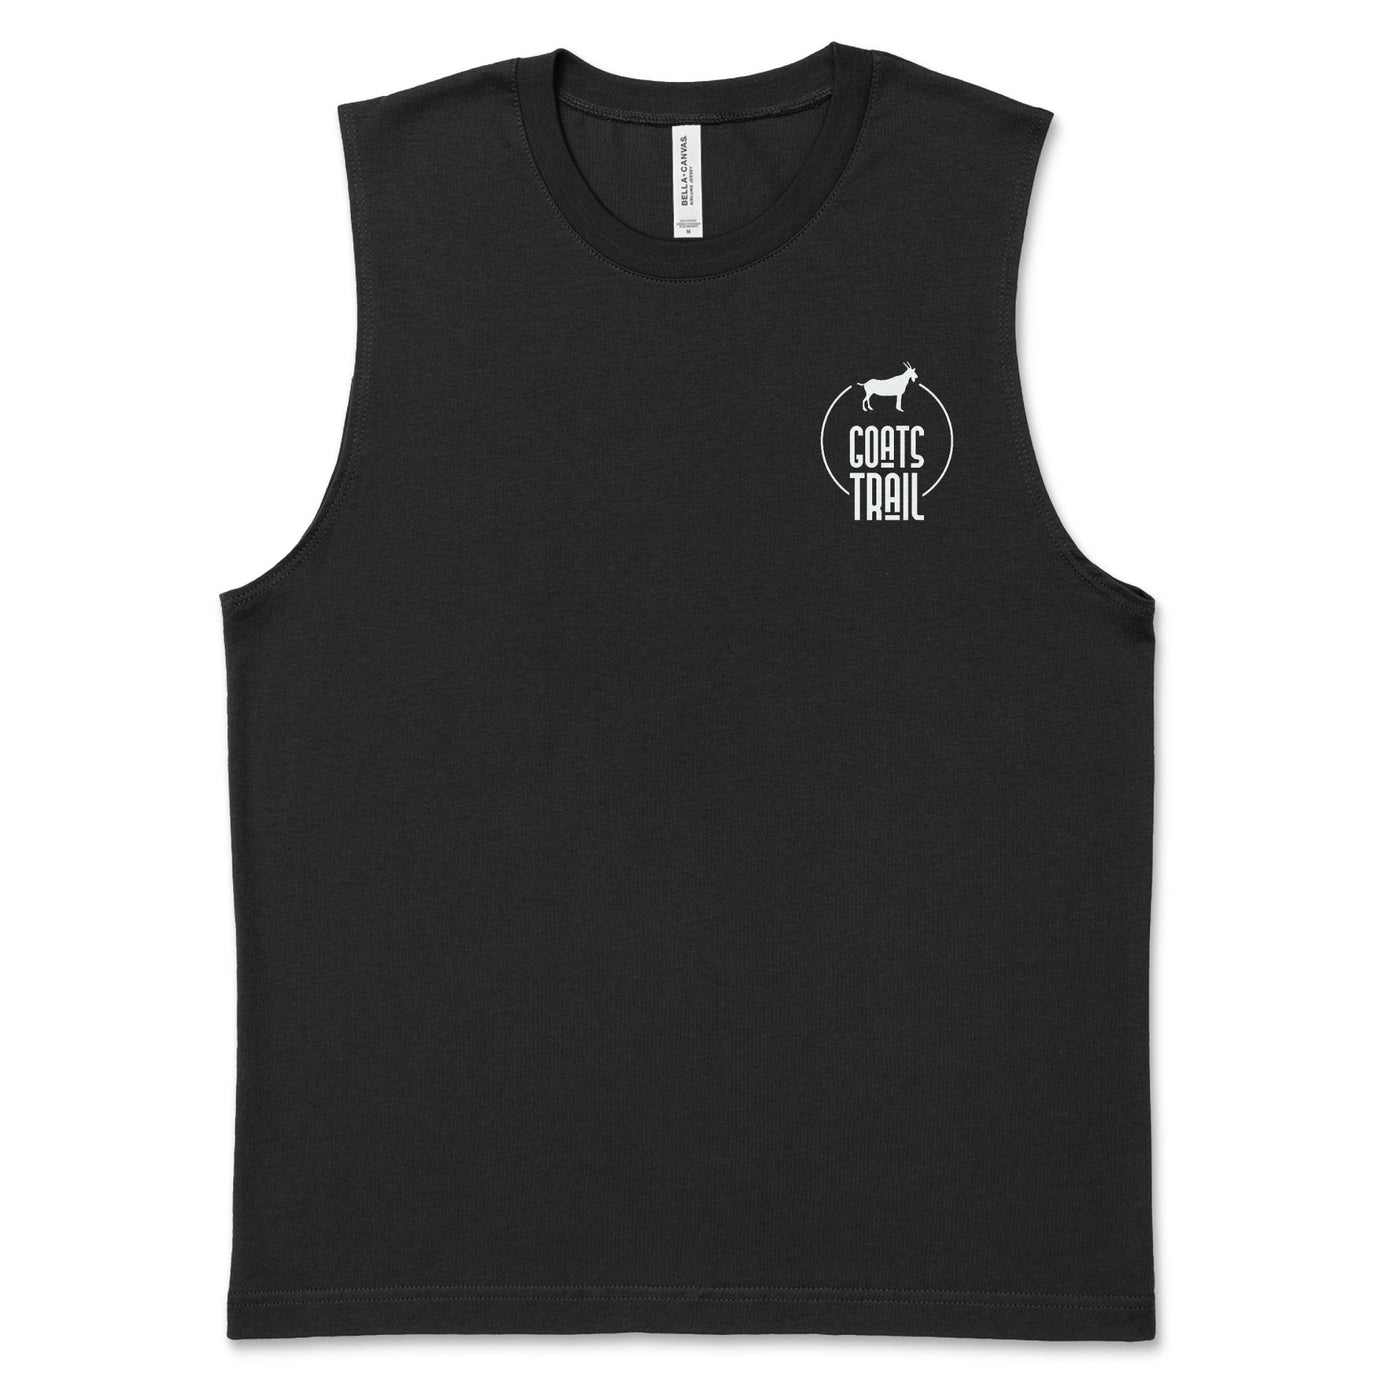 Men's Wander Muscle Tank Top - Goats Trail Off-Road Apparel Company